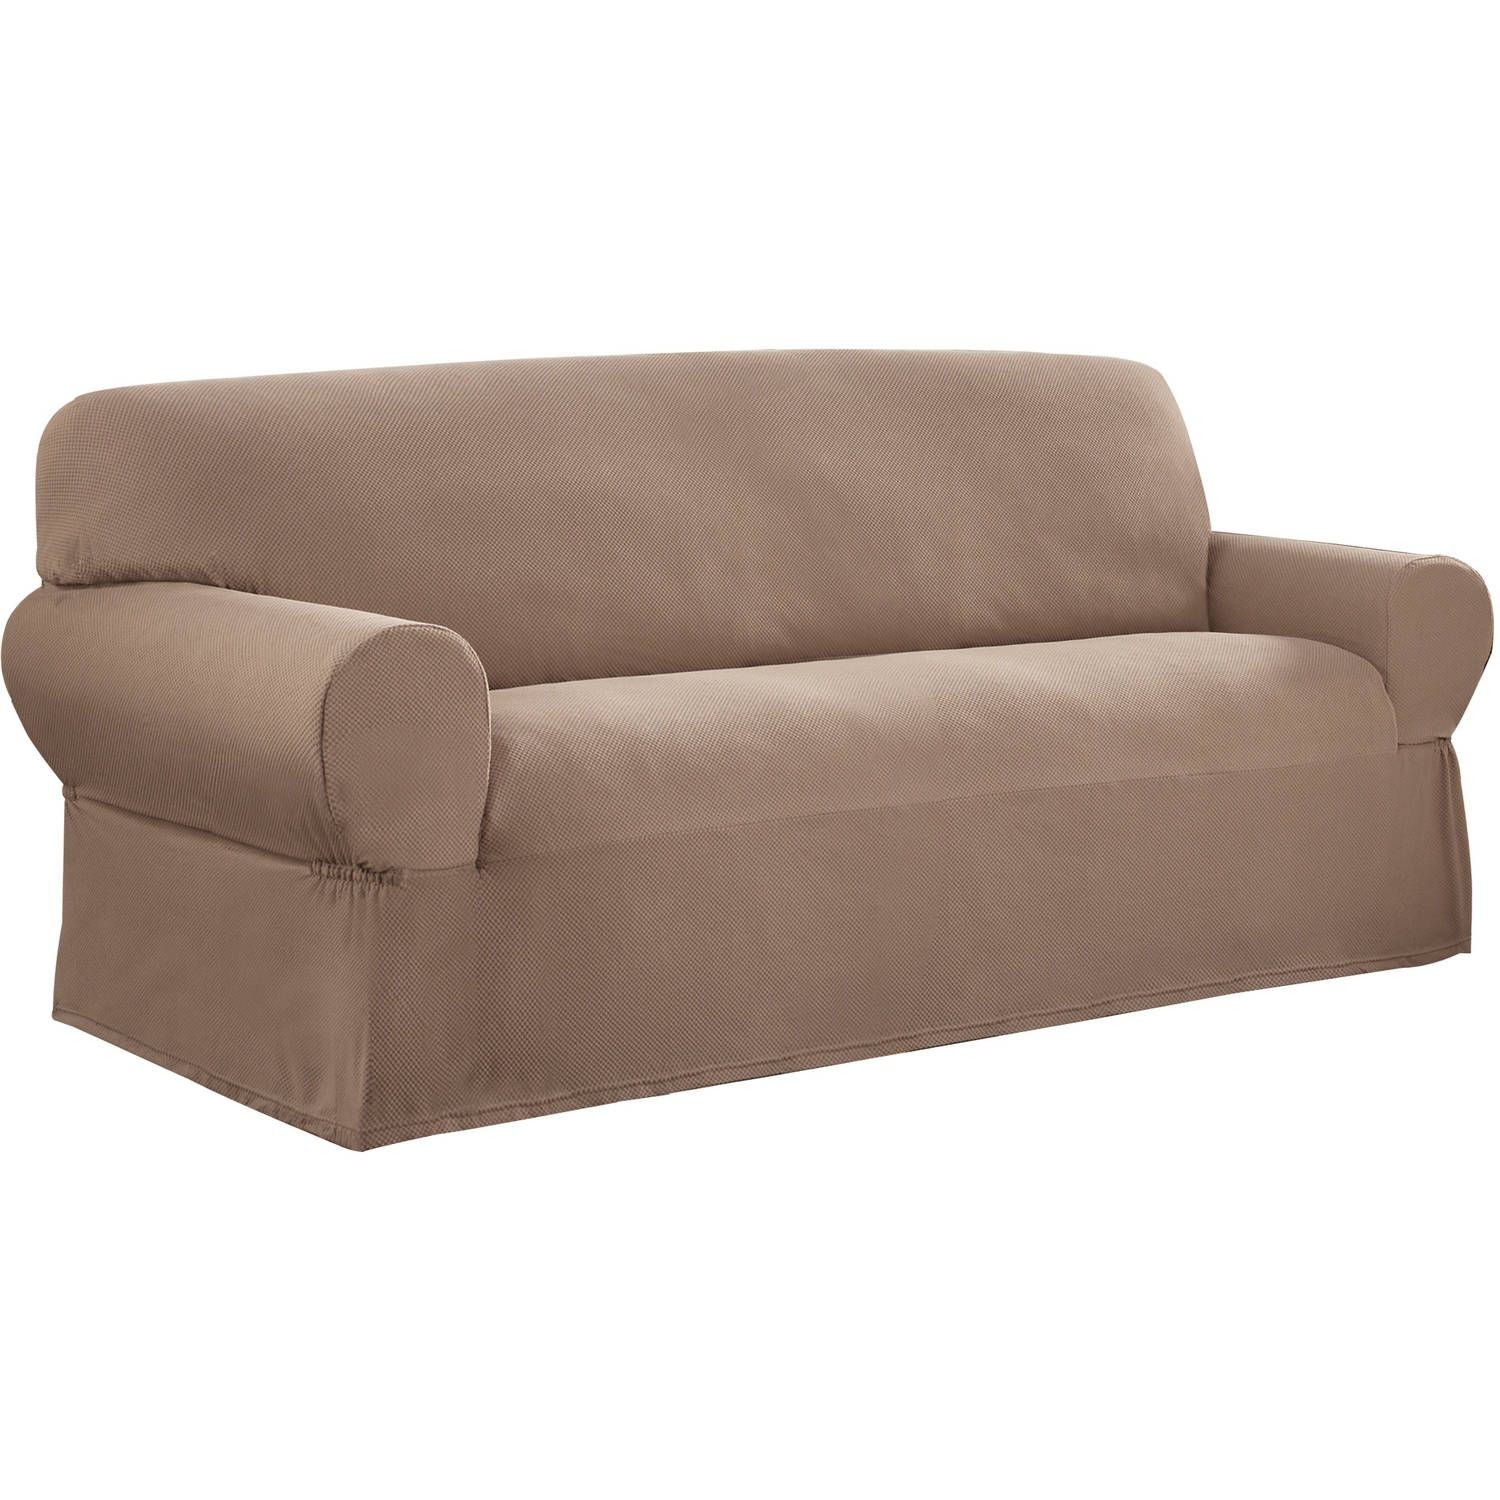 Mainstays 1 Piece Stretch Fabric Sofa Slipcover Walmart For Clearance Sofa Covers (View 8 of 12)